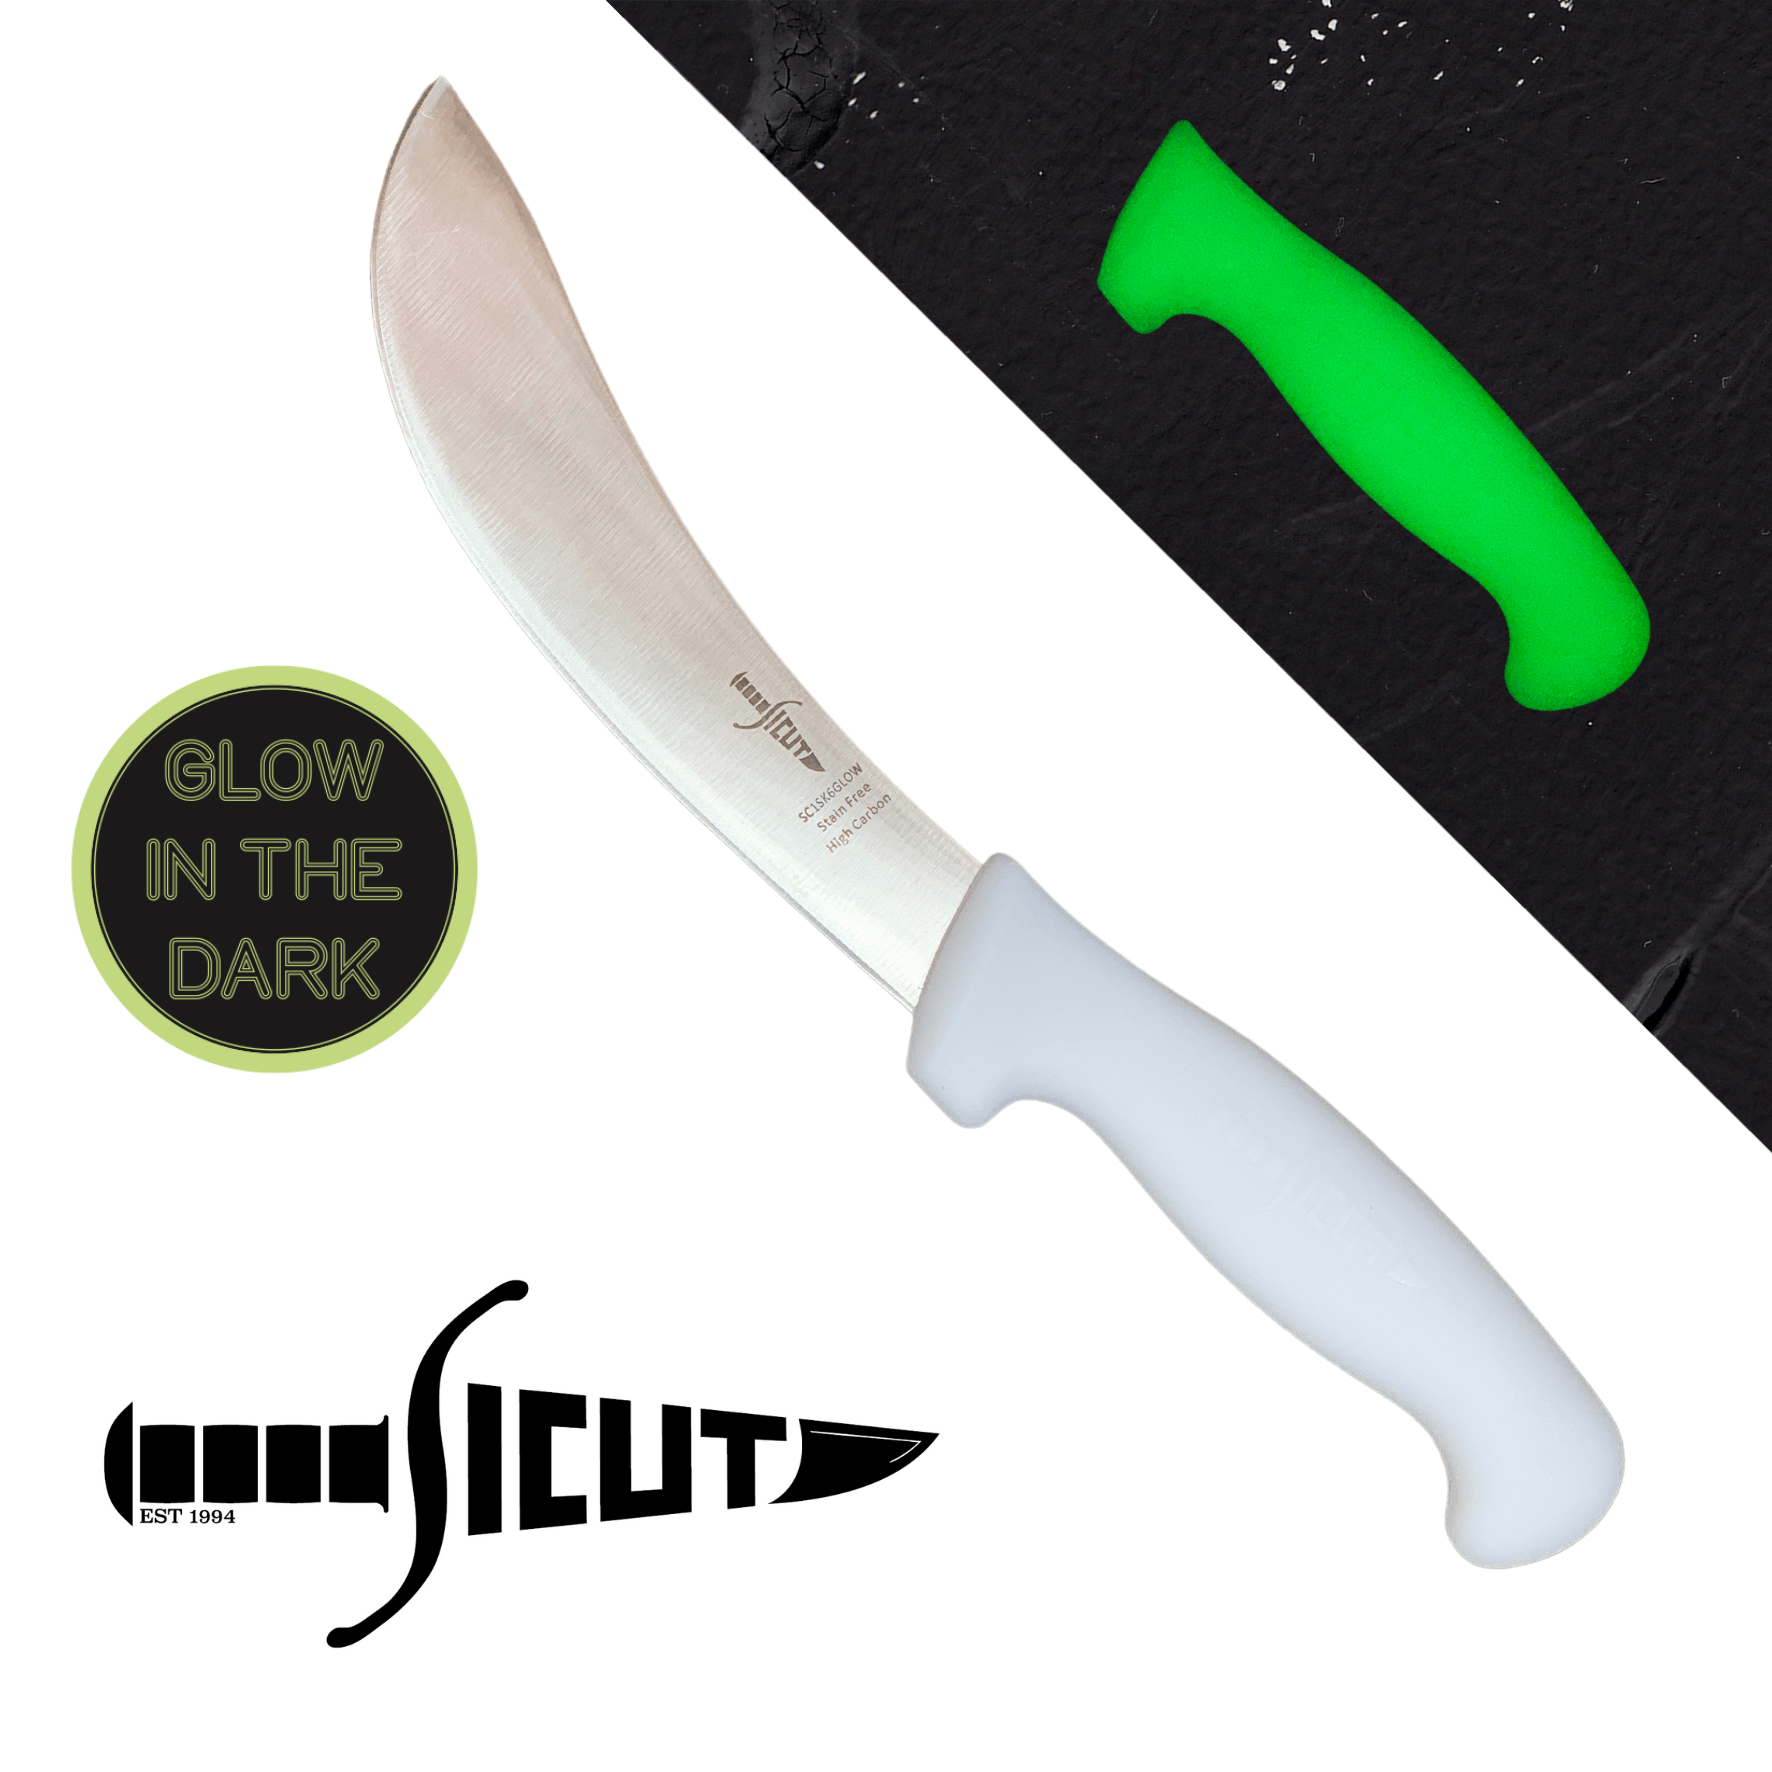 SICUT Curved Blade Beef Skinning Knife – 6″ Blade with GLOW IN THE